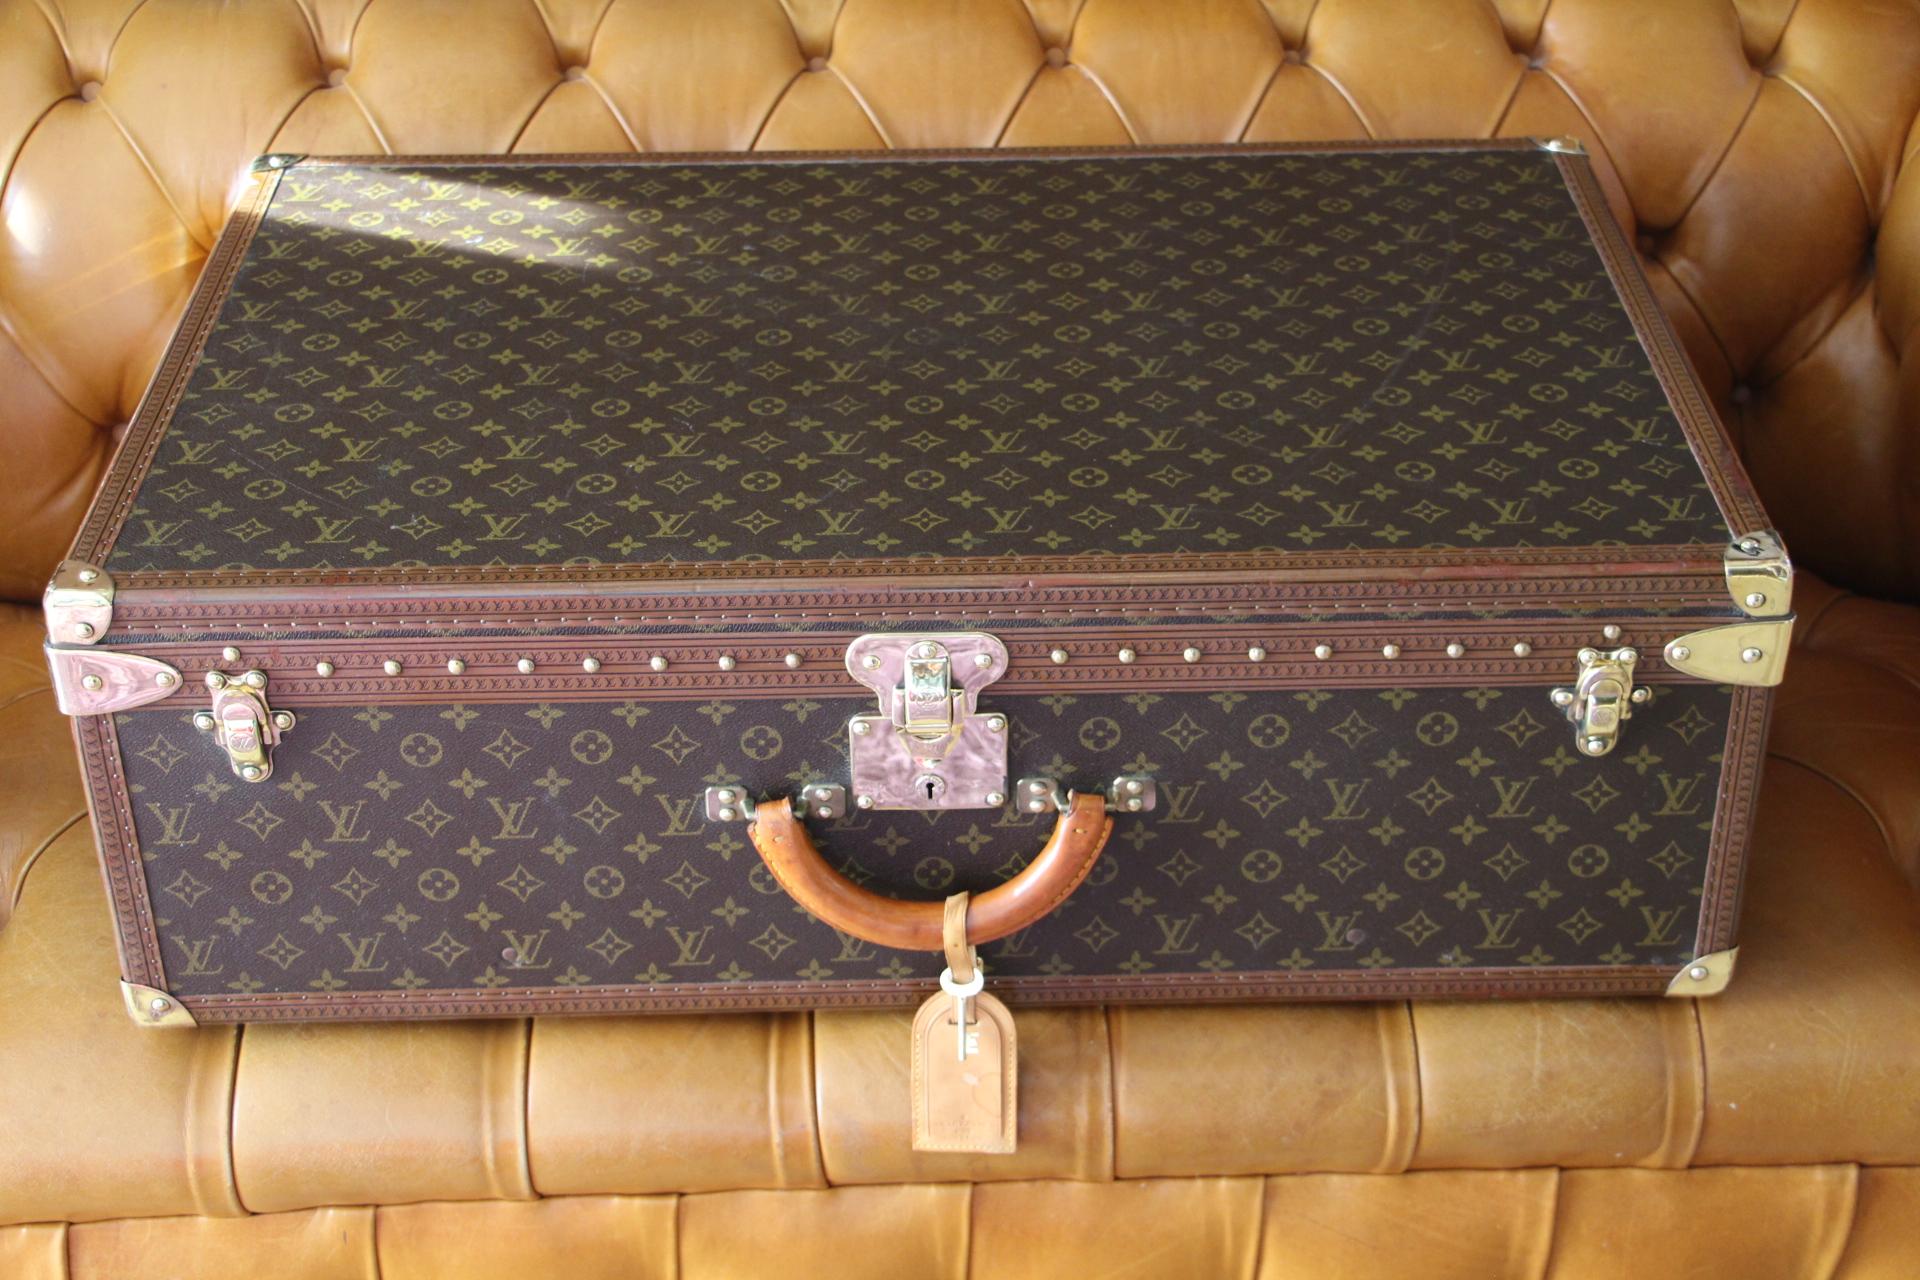 Magnificent Louis Vuitton Alzer monogramm suitcase. This 80 cm suitcase is the largest one made by Louis Vuitton.
All Louis Vuitton stamped solid brass fittings: locks, clasps and studs.It comes with its original LV leather name holder and its